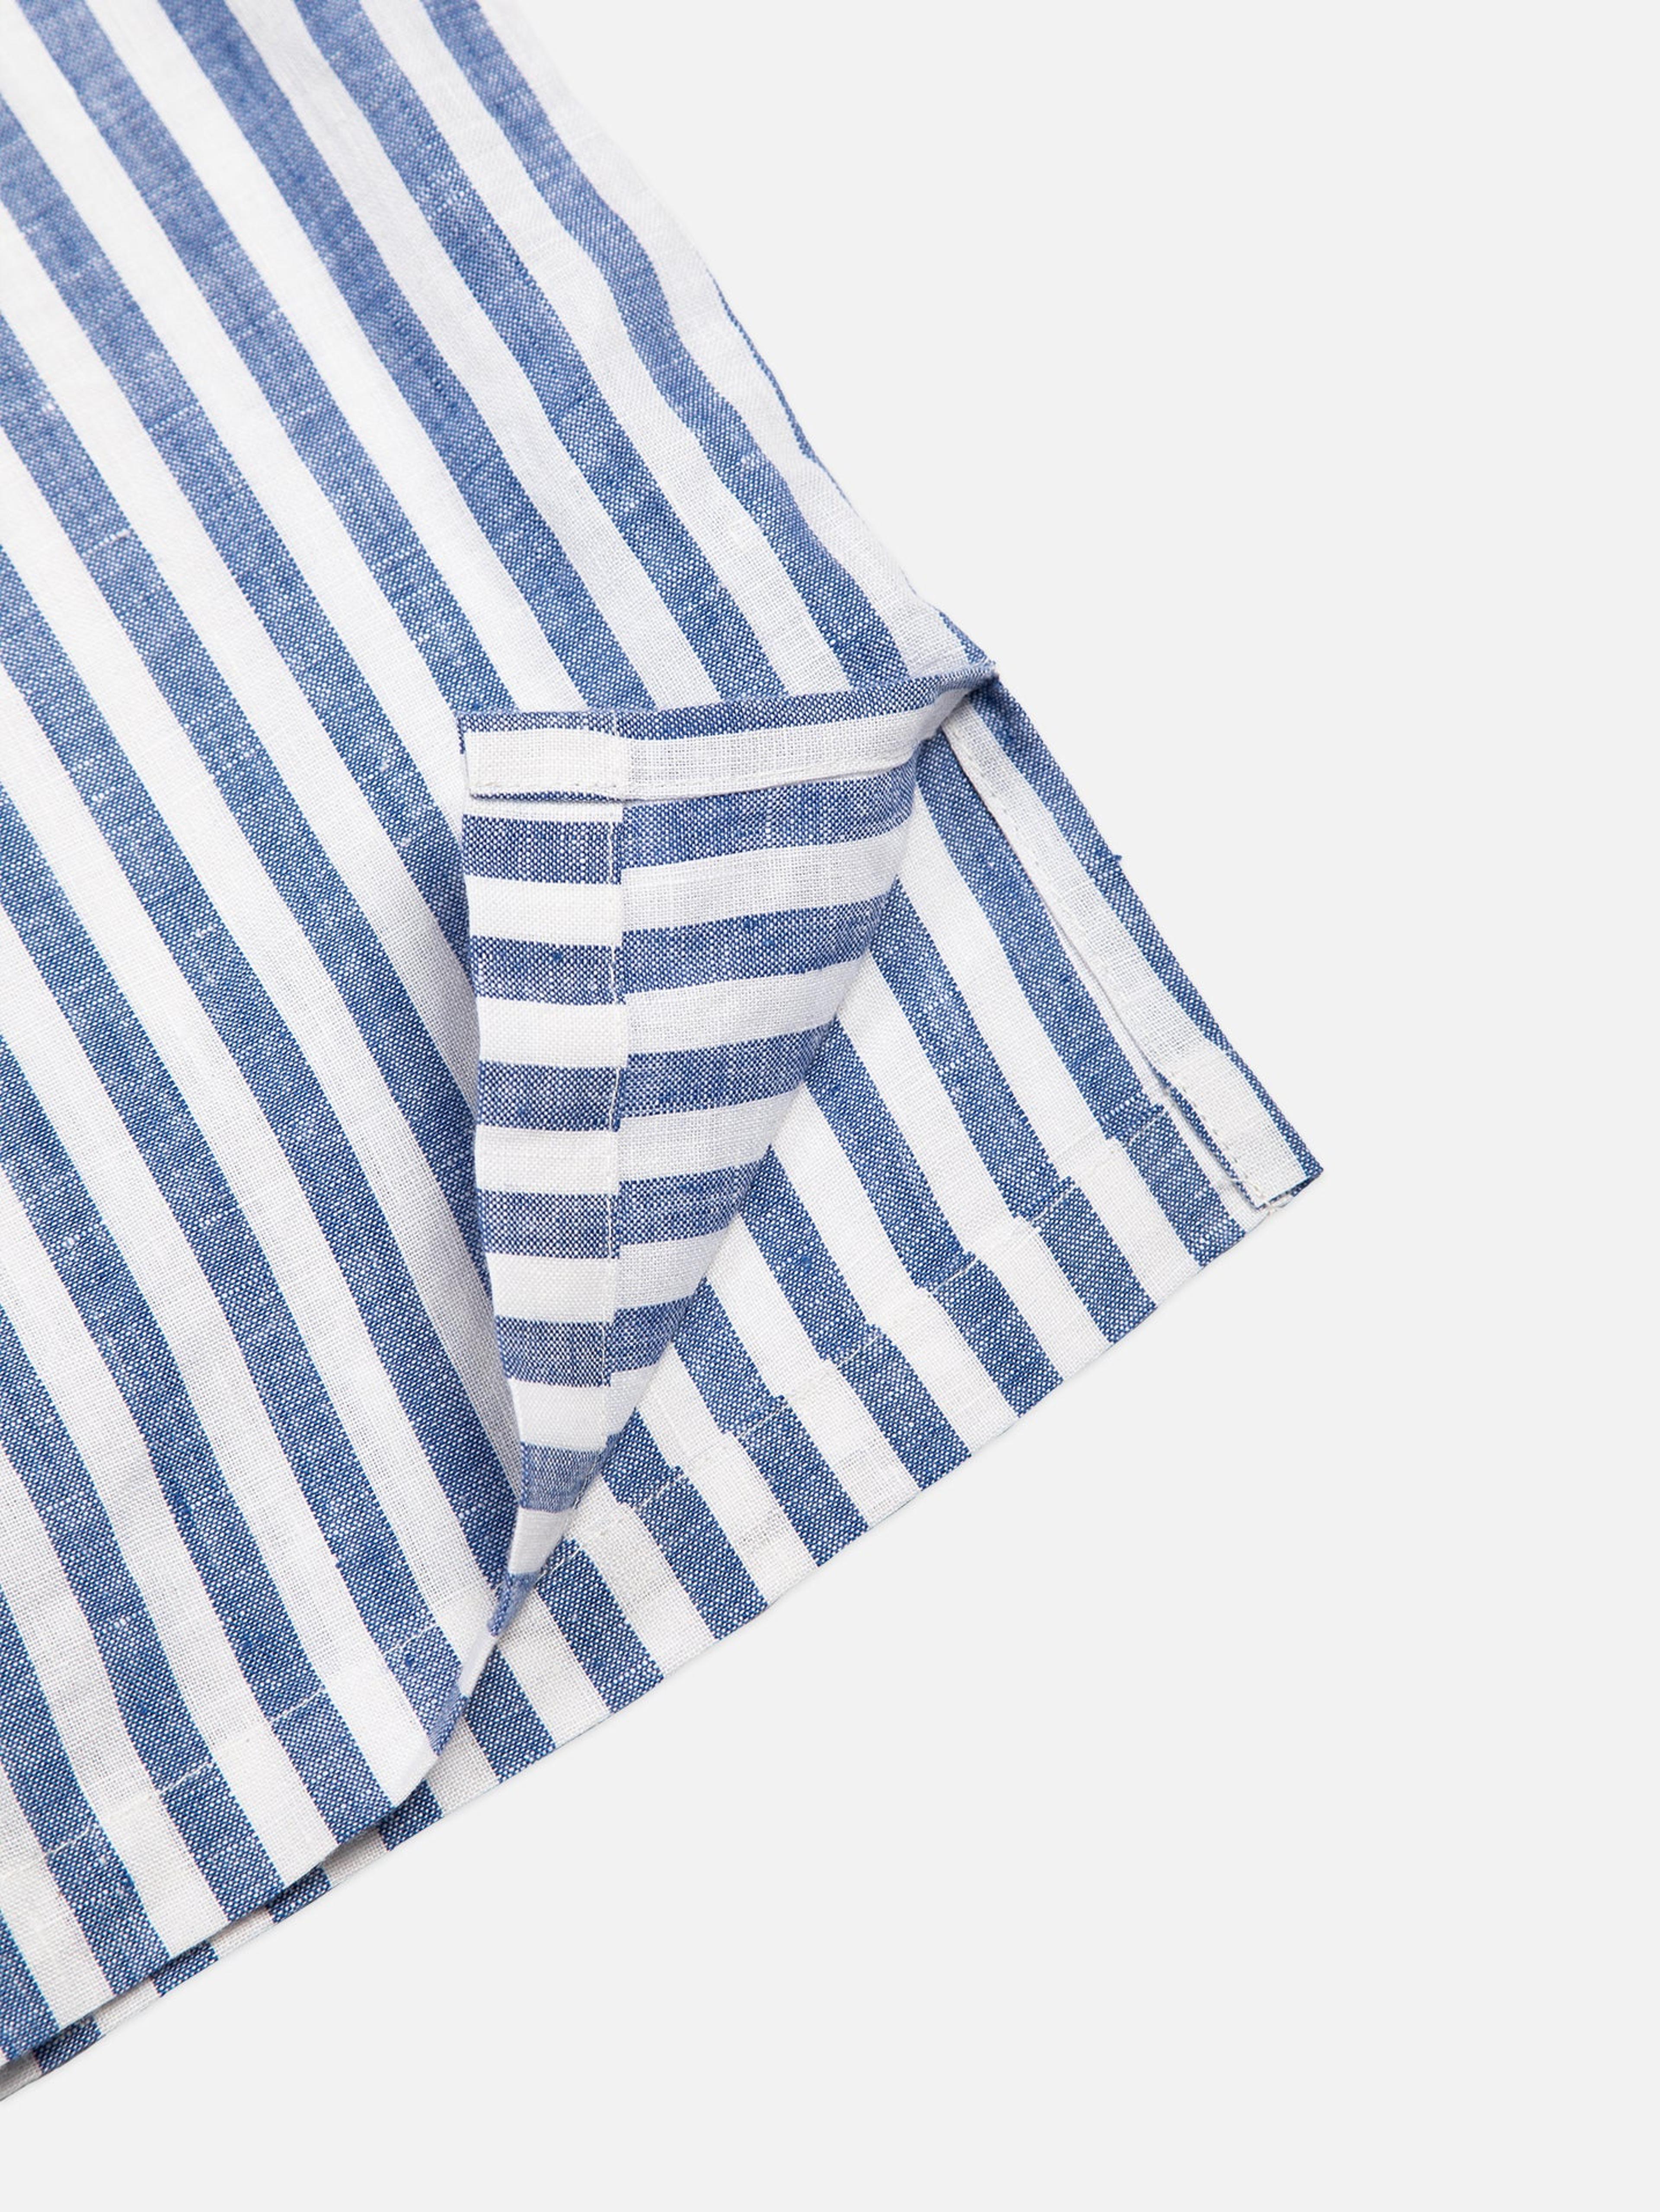 Alternate View 2 of YC Long Popover Shirt - Striped Blue